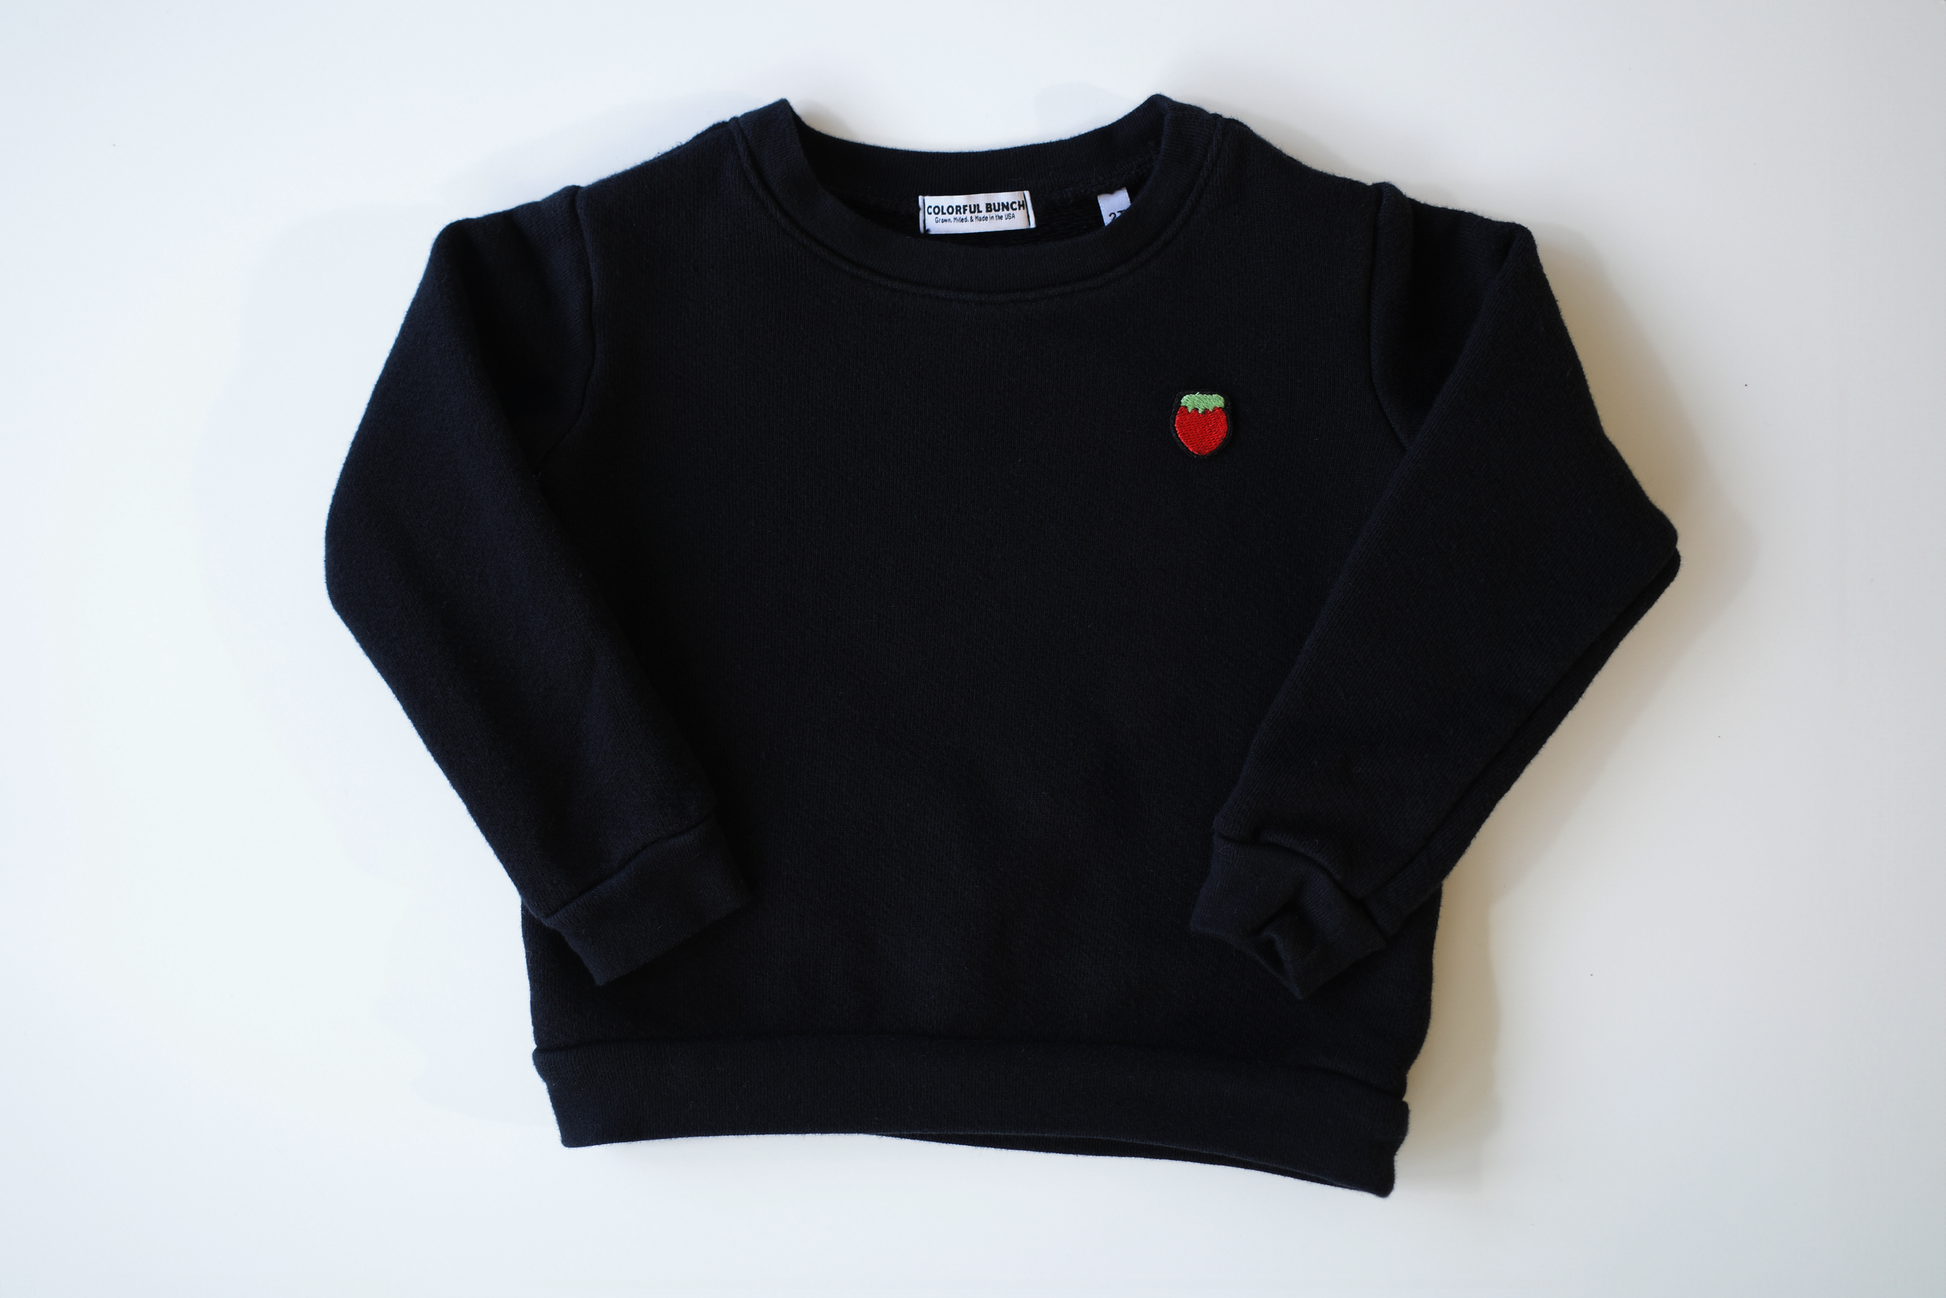 Classic black organic cotton children's sweatshirt, garment-dyed for exceptional softness with a retro look, featuring a vibrant embroidered strawberry, handcrafted in the USA by Colorful Bunch's environmentally conscious children's clothing line.